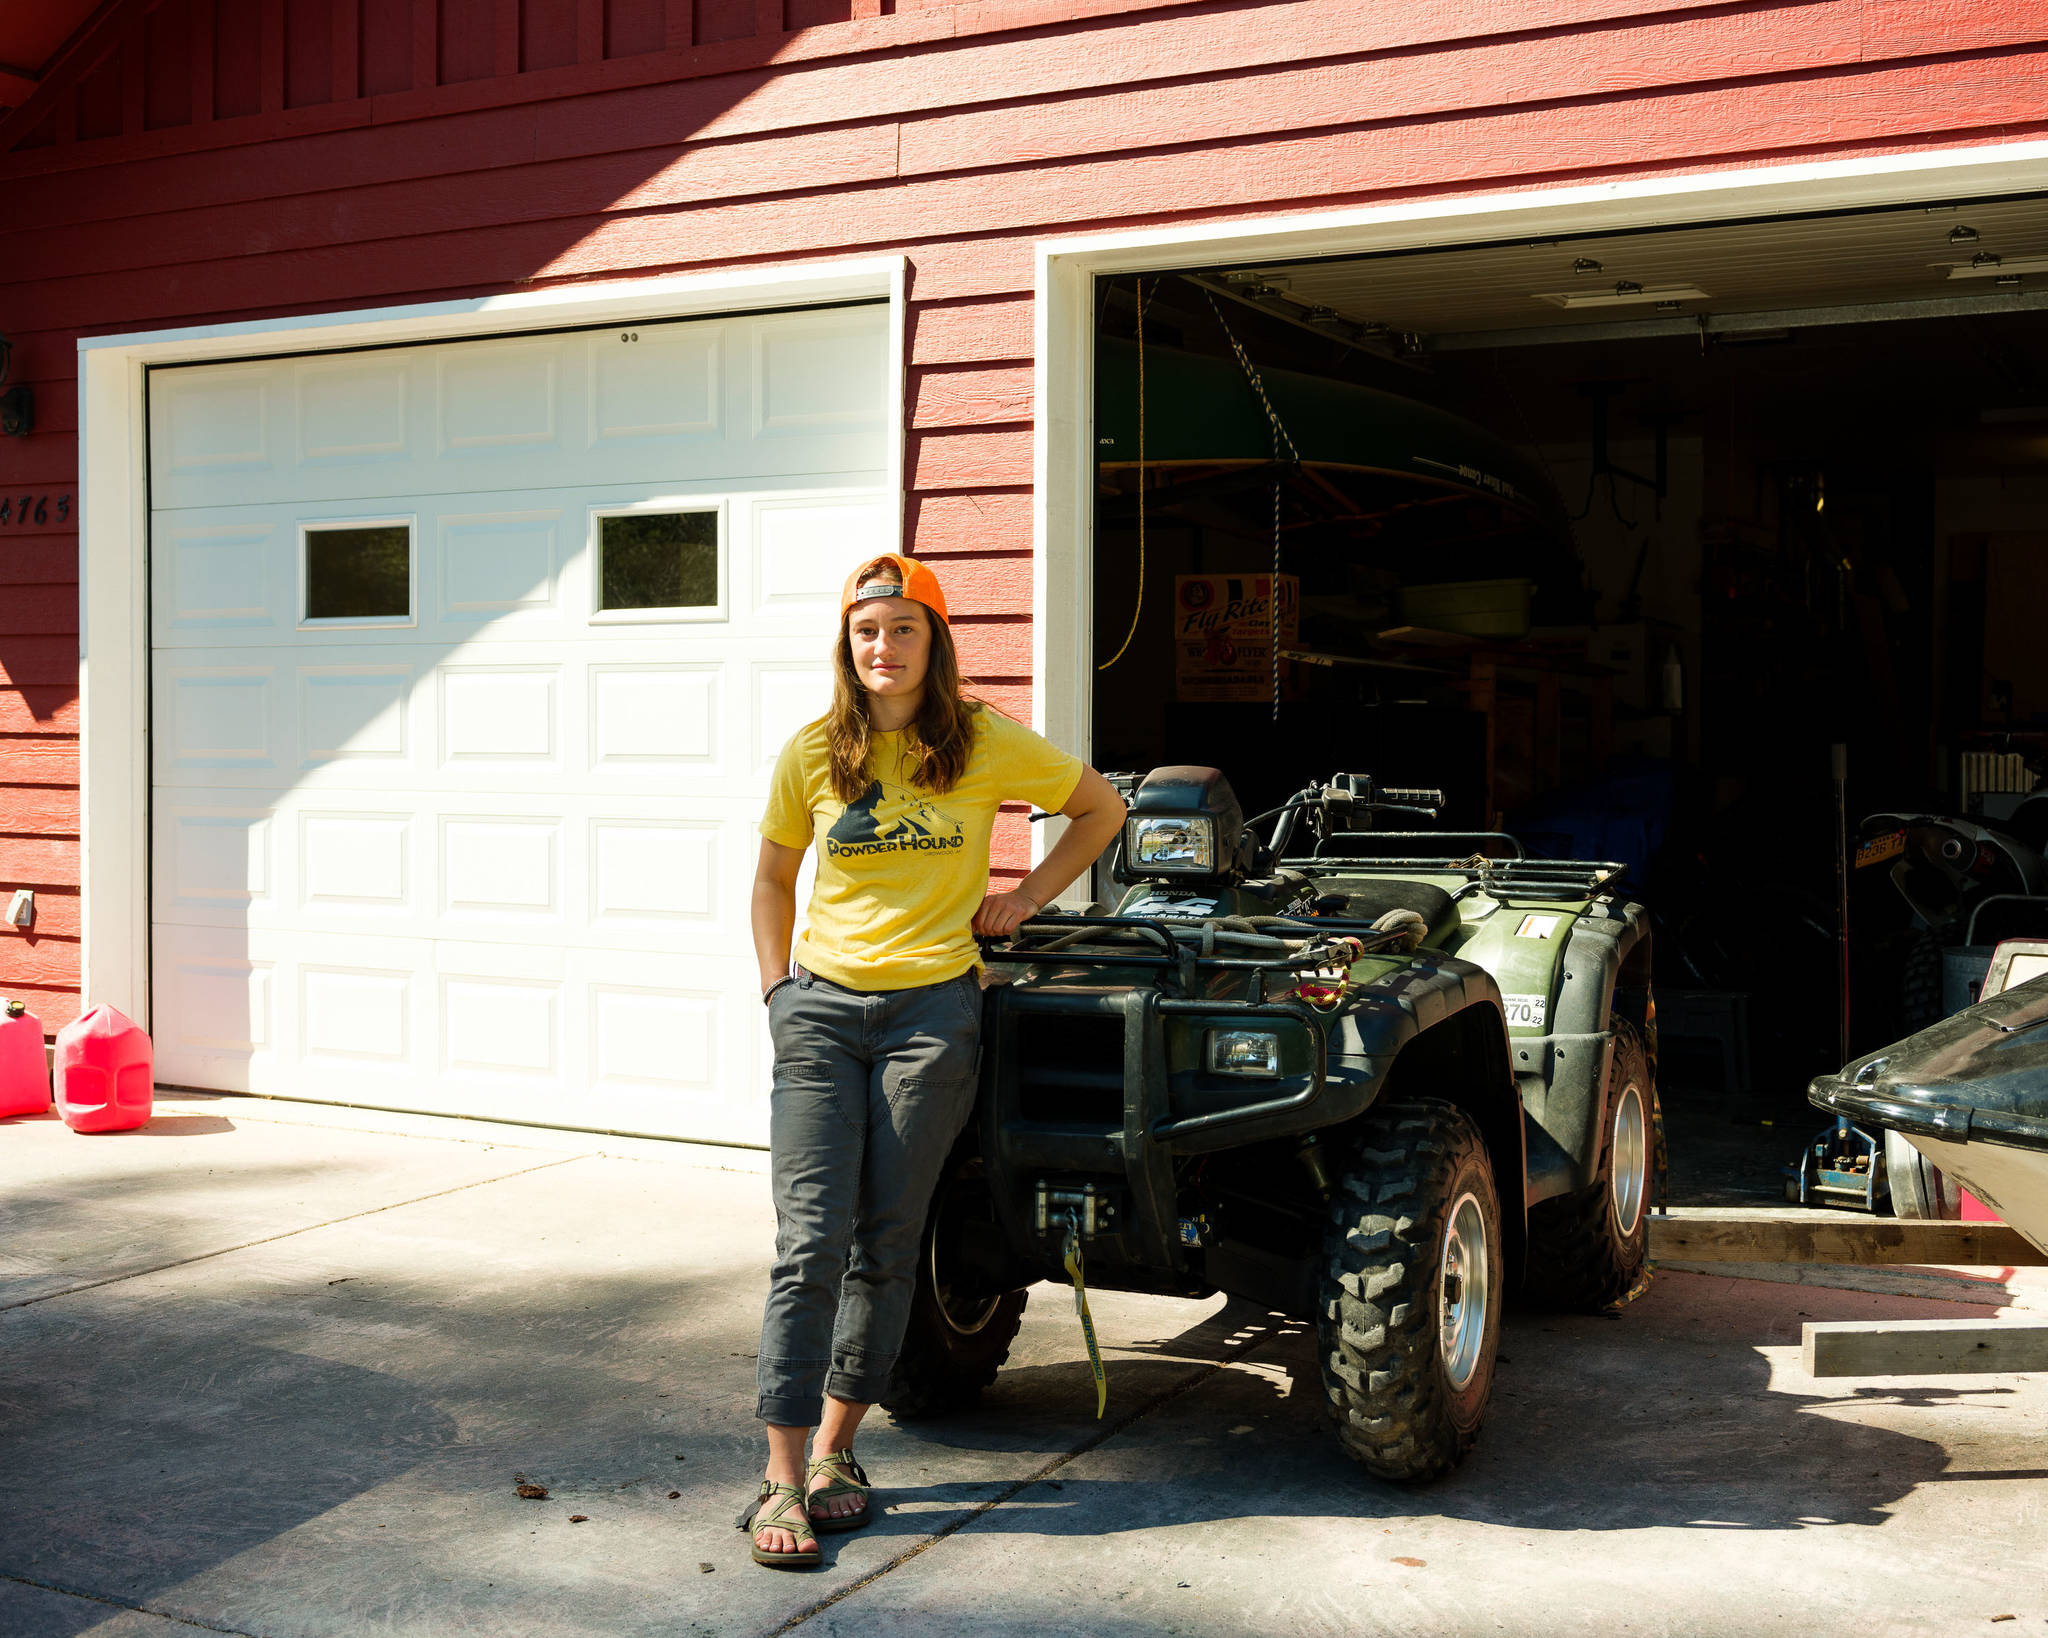 Seward High School student Annika Nilsson, 17, stands next to her family’s all terrain vehicle, which is one of the only vehicles that can be used when her neighborhood roads flood every autumn. (Young Kim for The Hechinger Report)